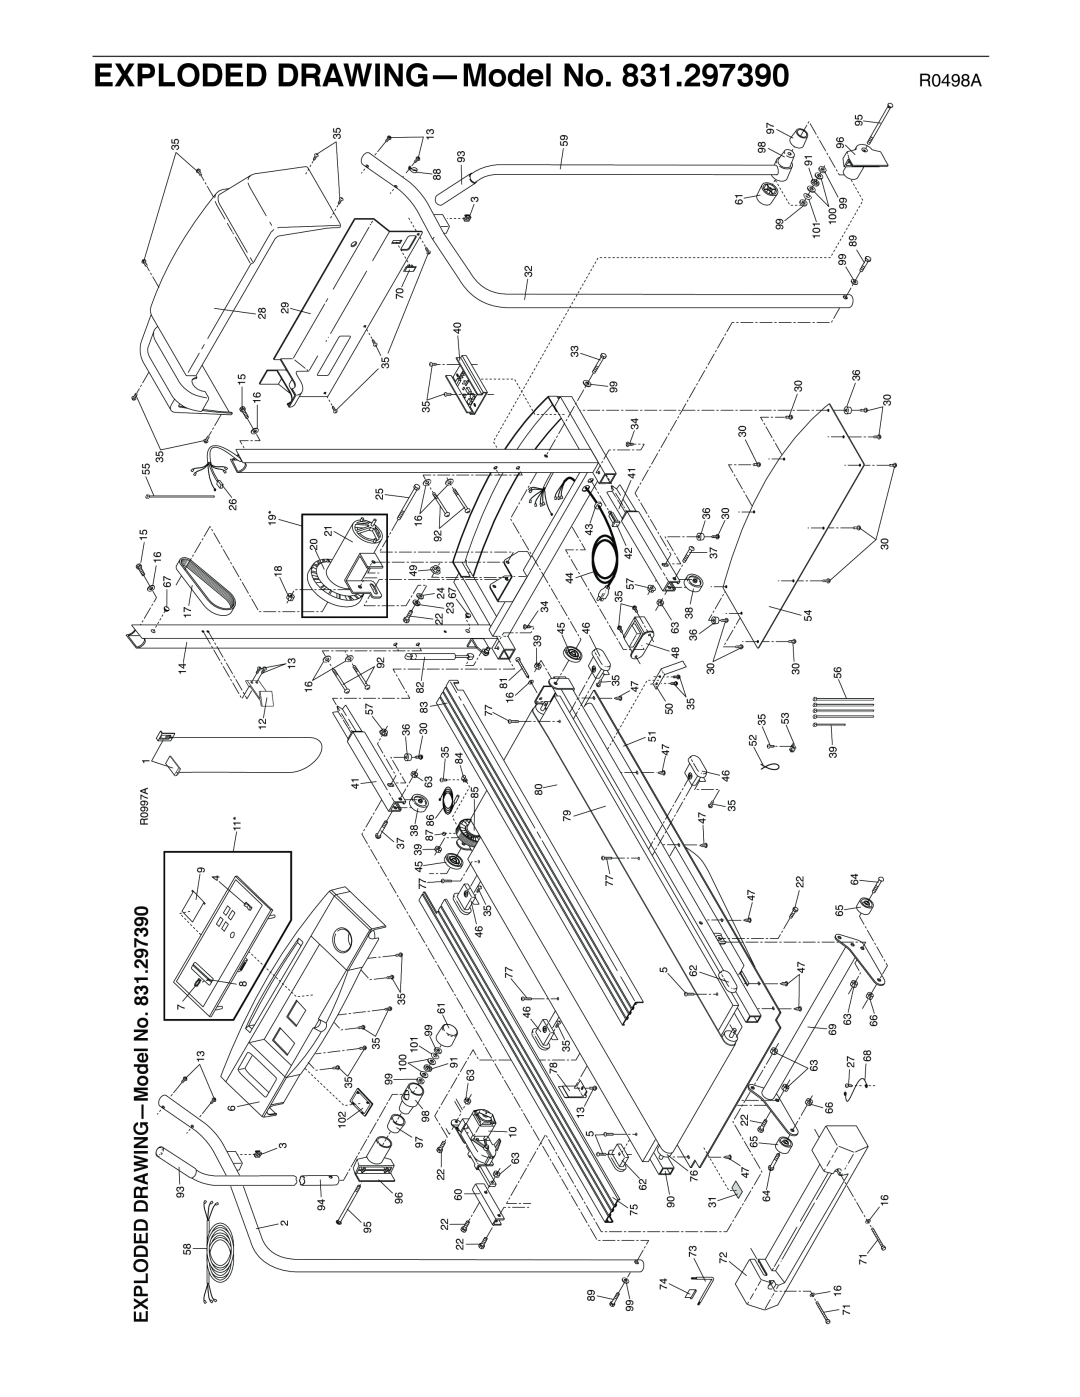 ProForm 831.297390 user manual Exploded, EXPLODED DRAWING-Model No, R0997A, 3956 